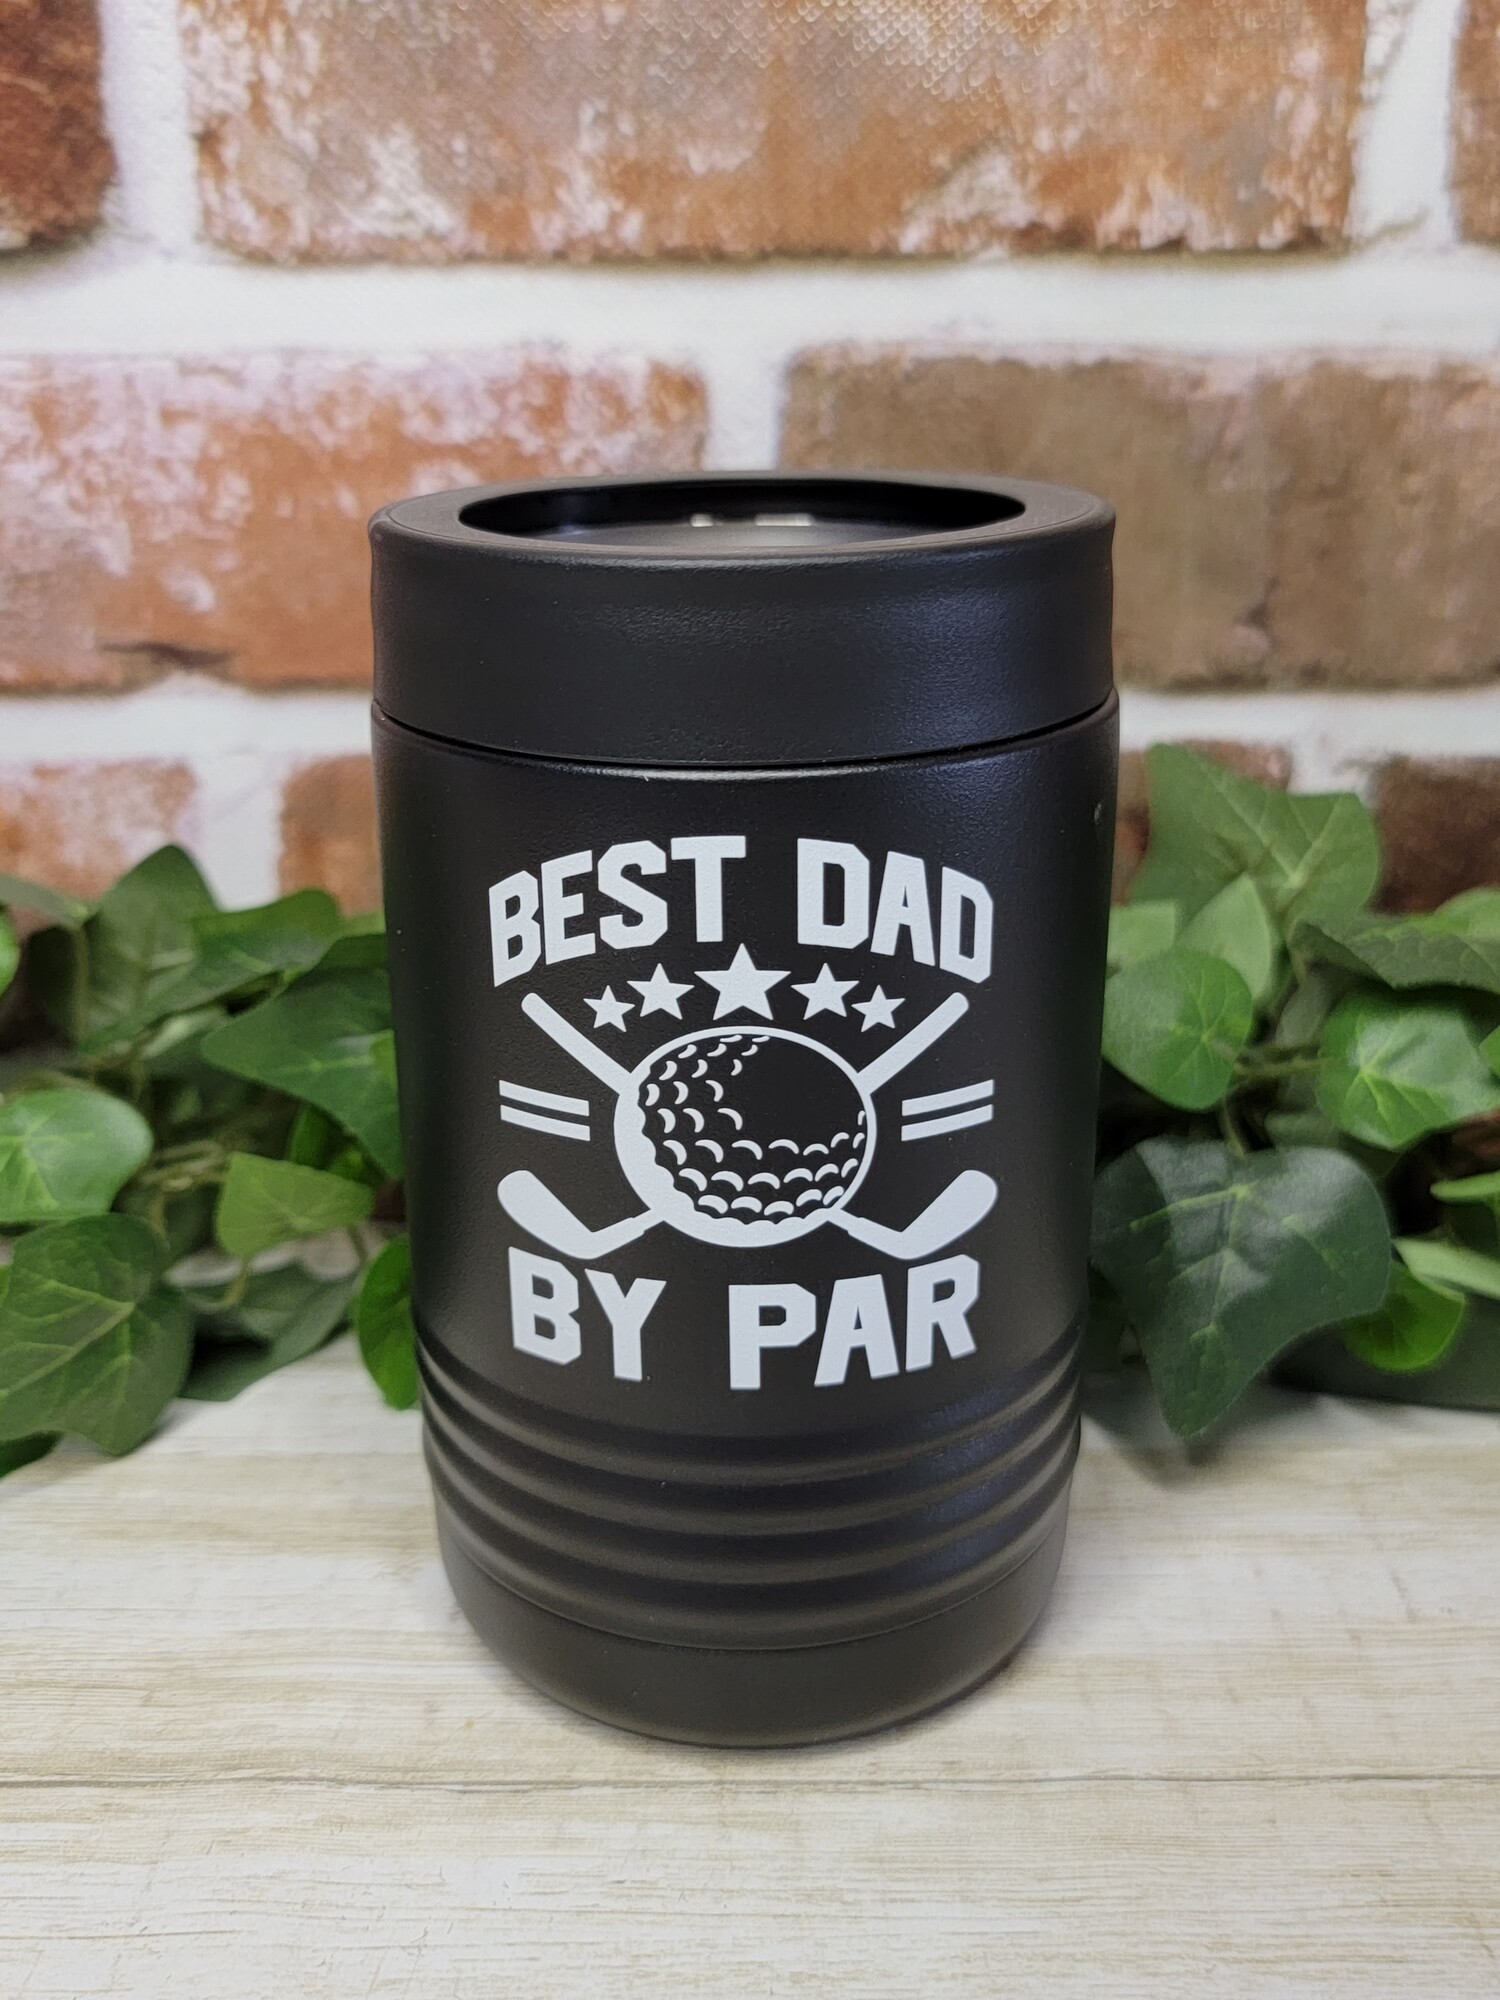 Dad will love his new can cooler. Our can coolers are UV Printed with the image shown of Best Dad by Par

Keep your drinks ice cold longer!
- Holds Standard 12oz Can
- No sweat Exterior
- Hand wash recommended

We UV Print the cups; so there is no worries of a vinyl decal peeling or coming off.